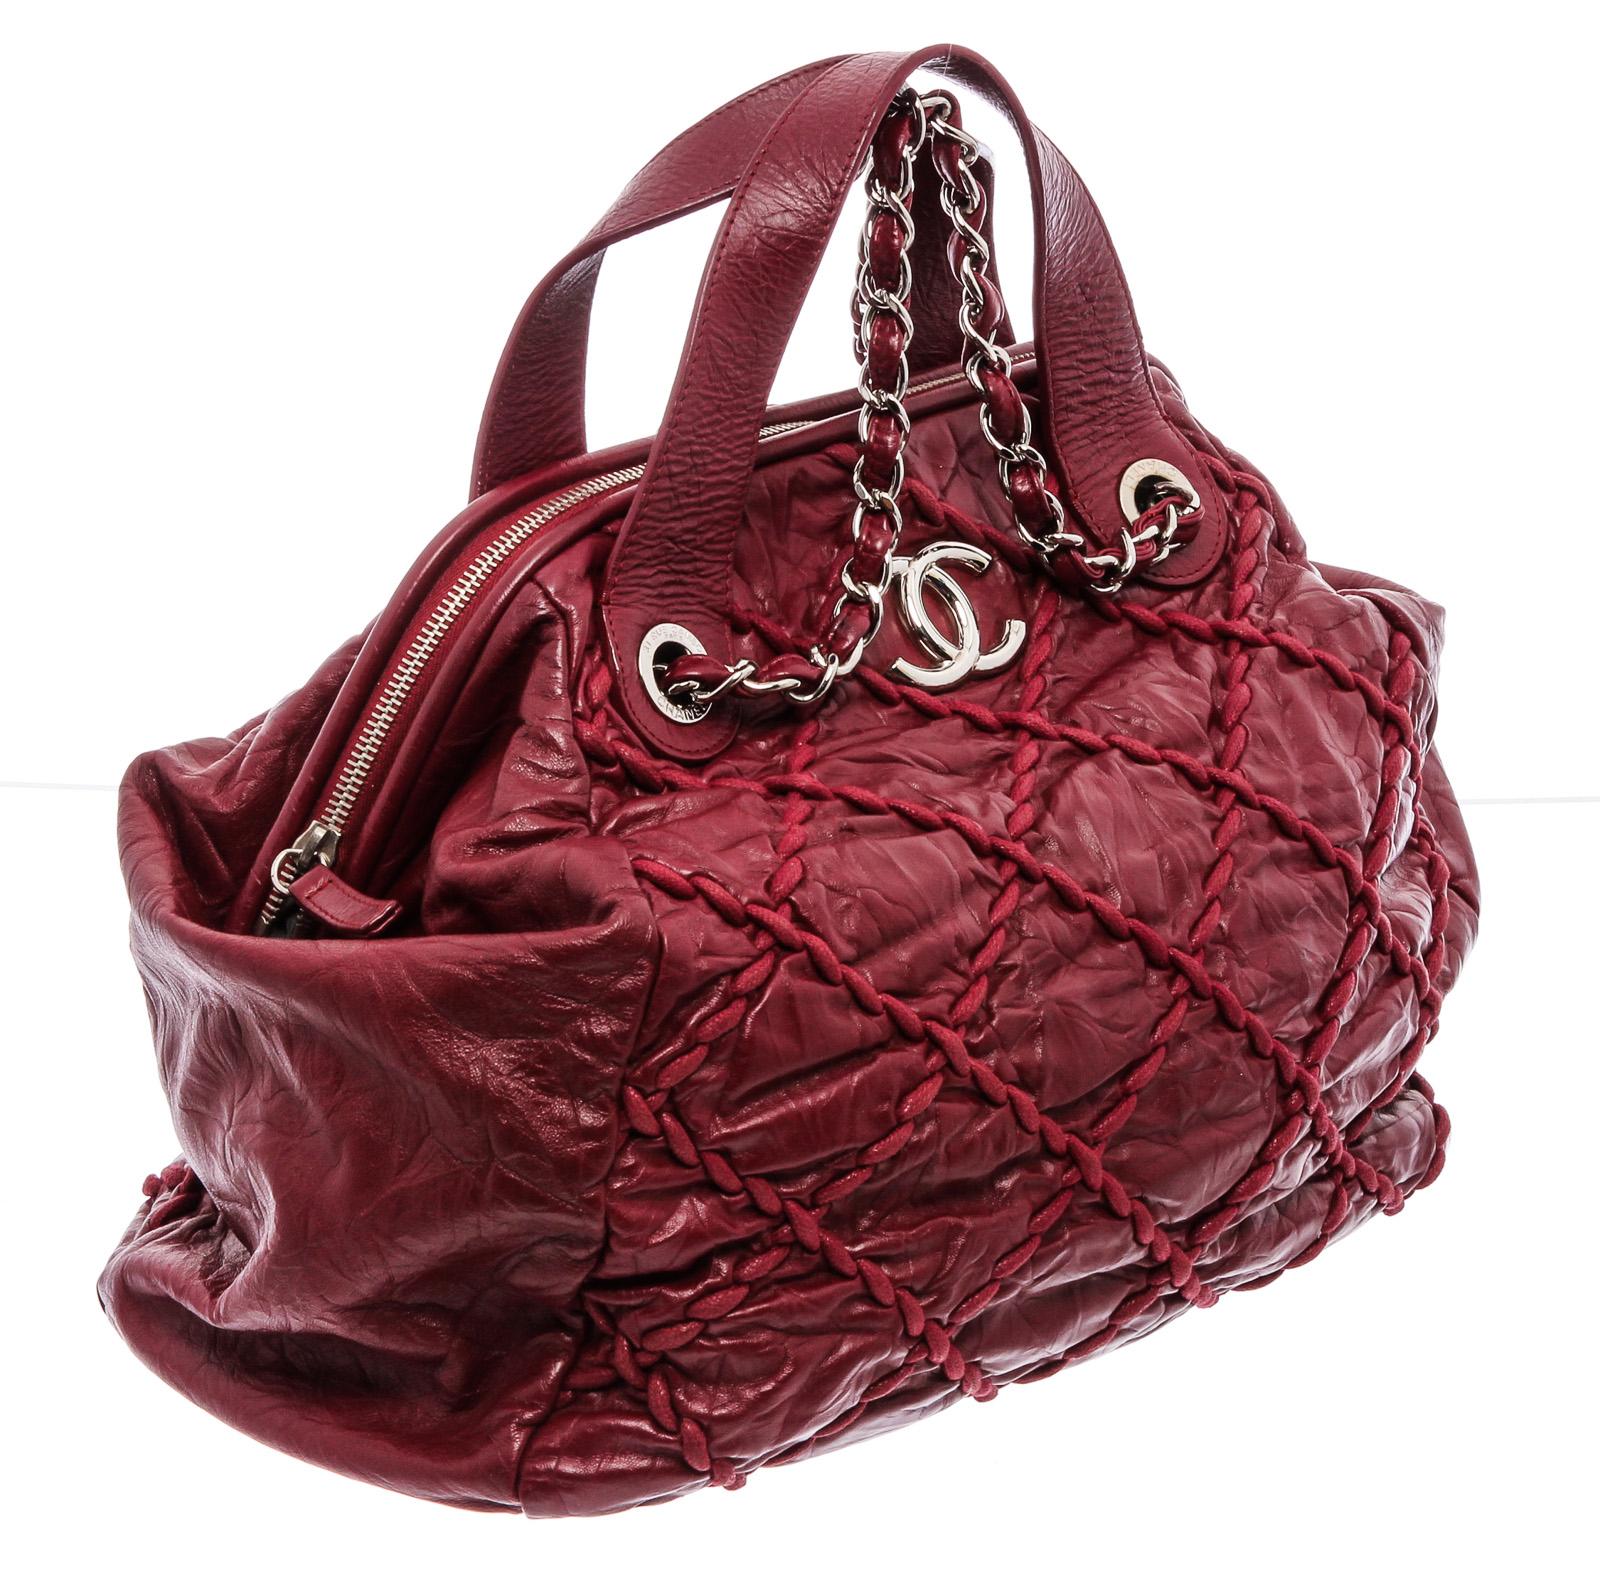 Red distressed leather Chanel Bowler bag with silver-tone hardware, dual chain-link and leather shoulder straps, dual flat top handles, tonal quilted Ultra Stitch accents at exterior, CC logo adornment at front, protective feet at base, grey